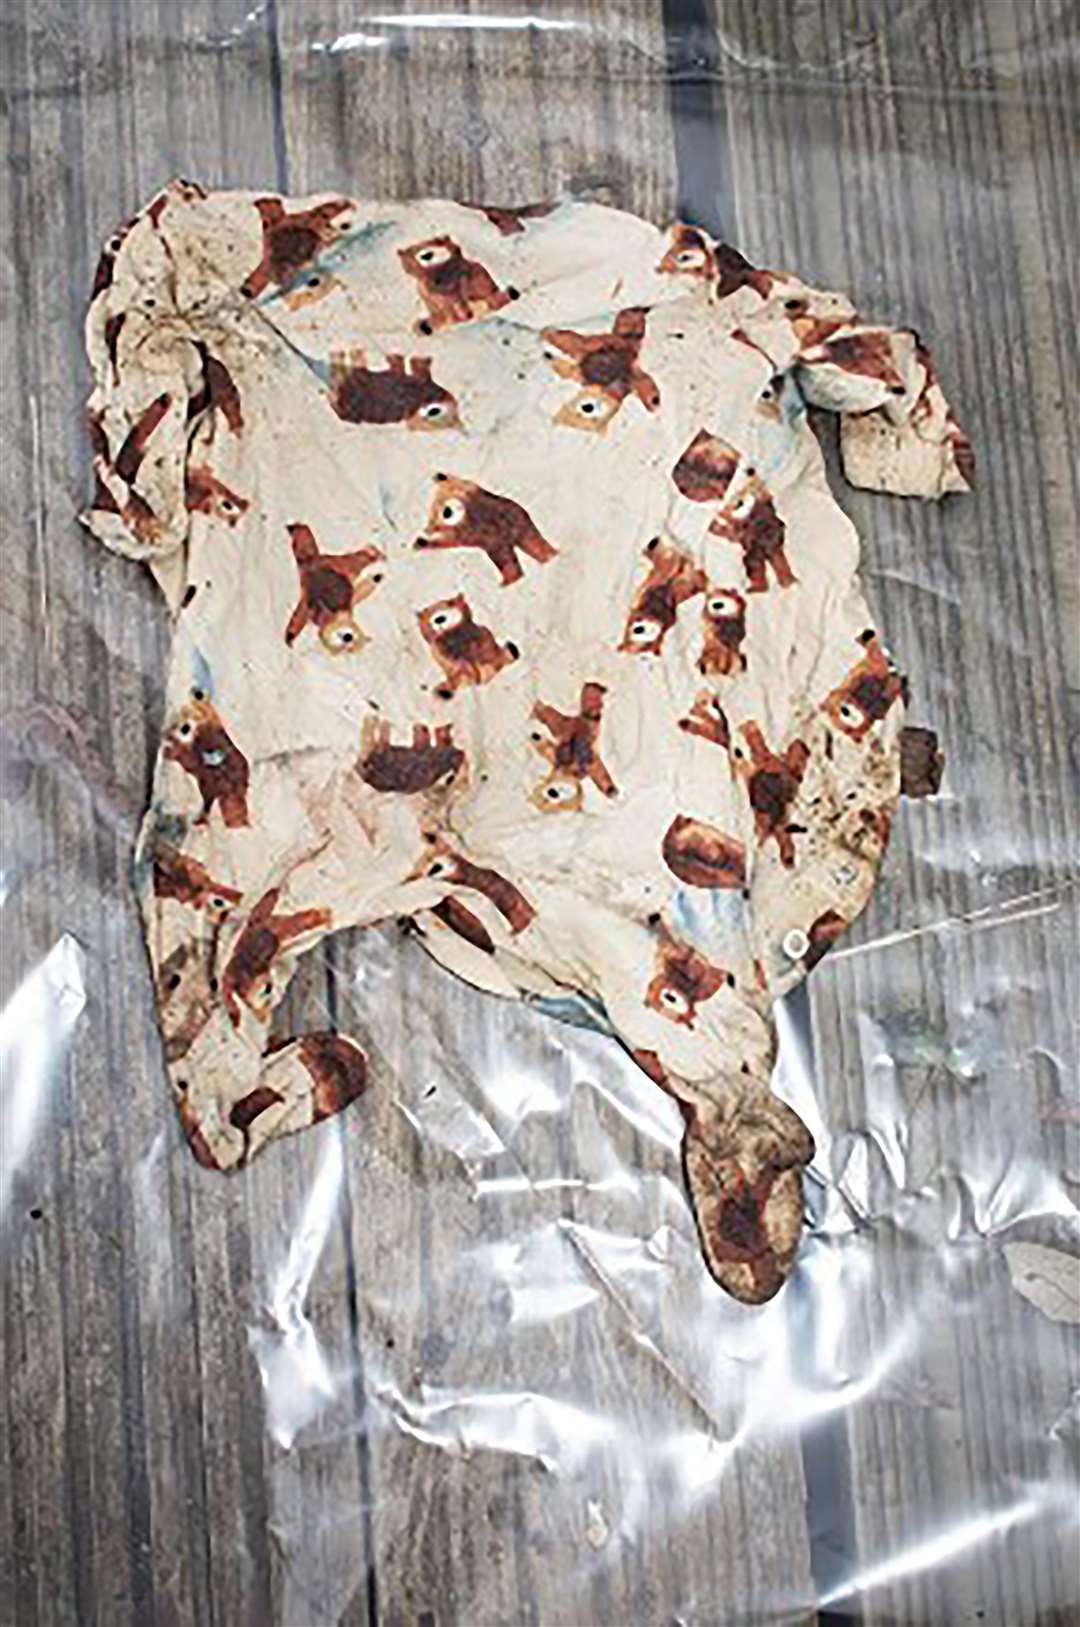 Baby Victoria’s babygrow was found with her body in a Lidl bag in a shed in Lower Roedale Allotments, East Sussex (Met Police/PA)